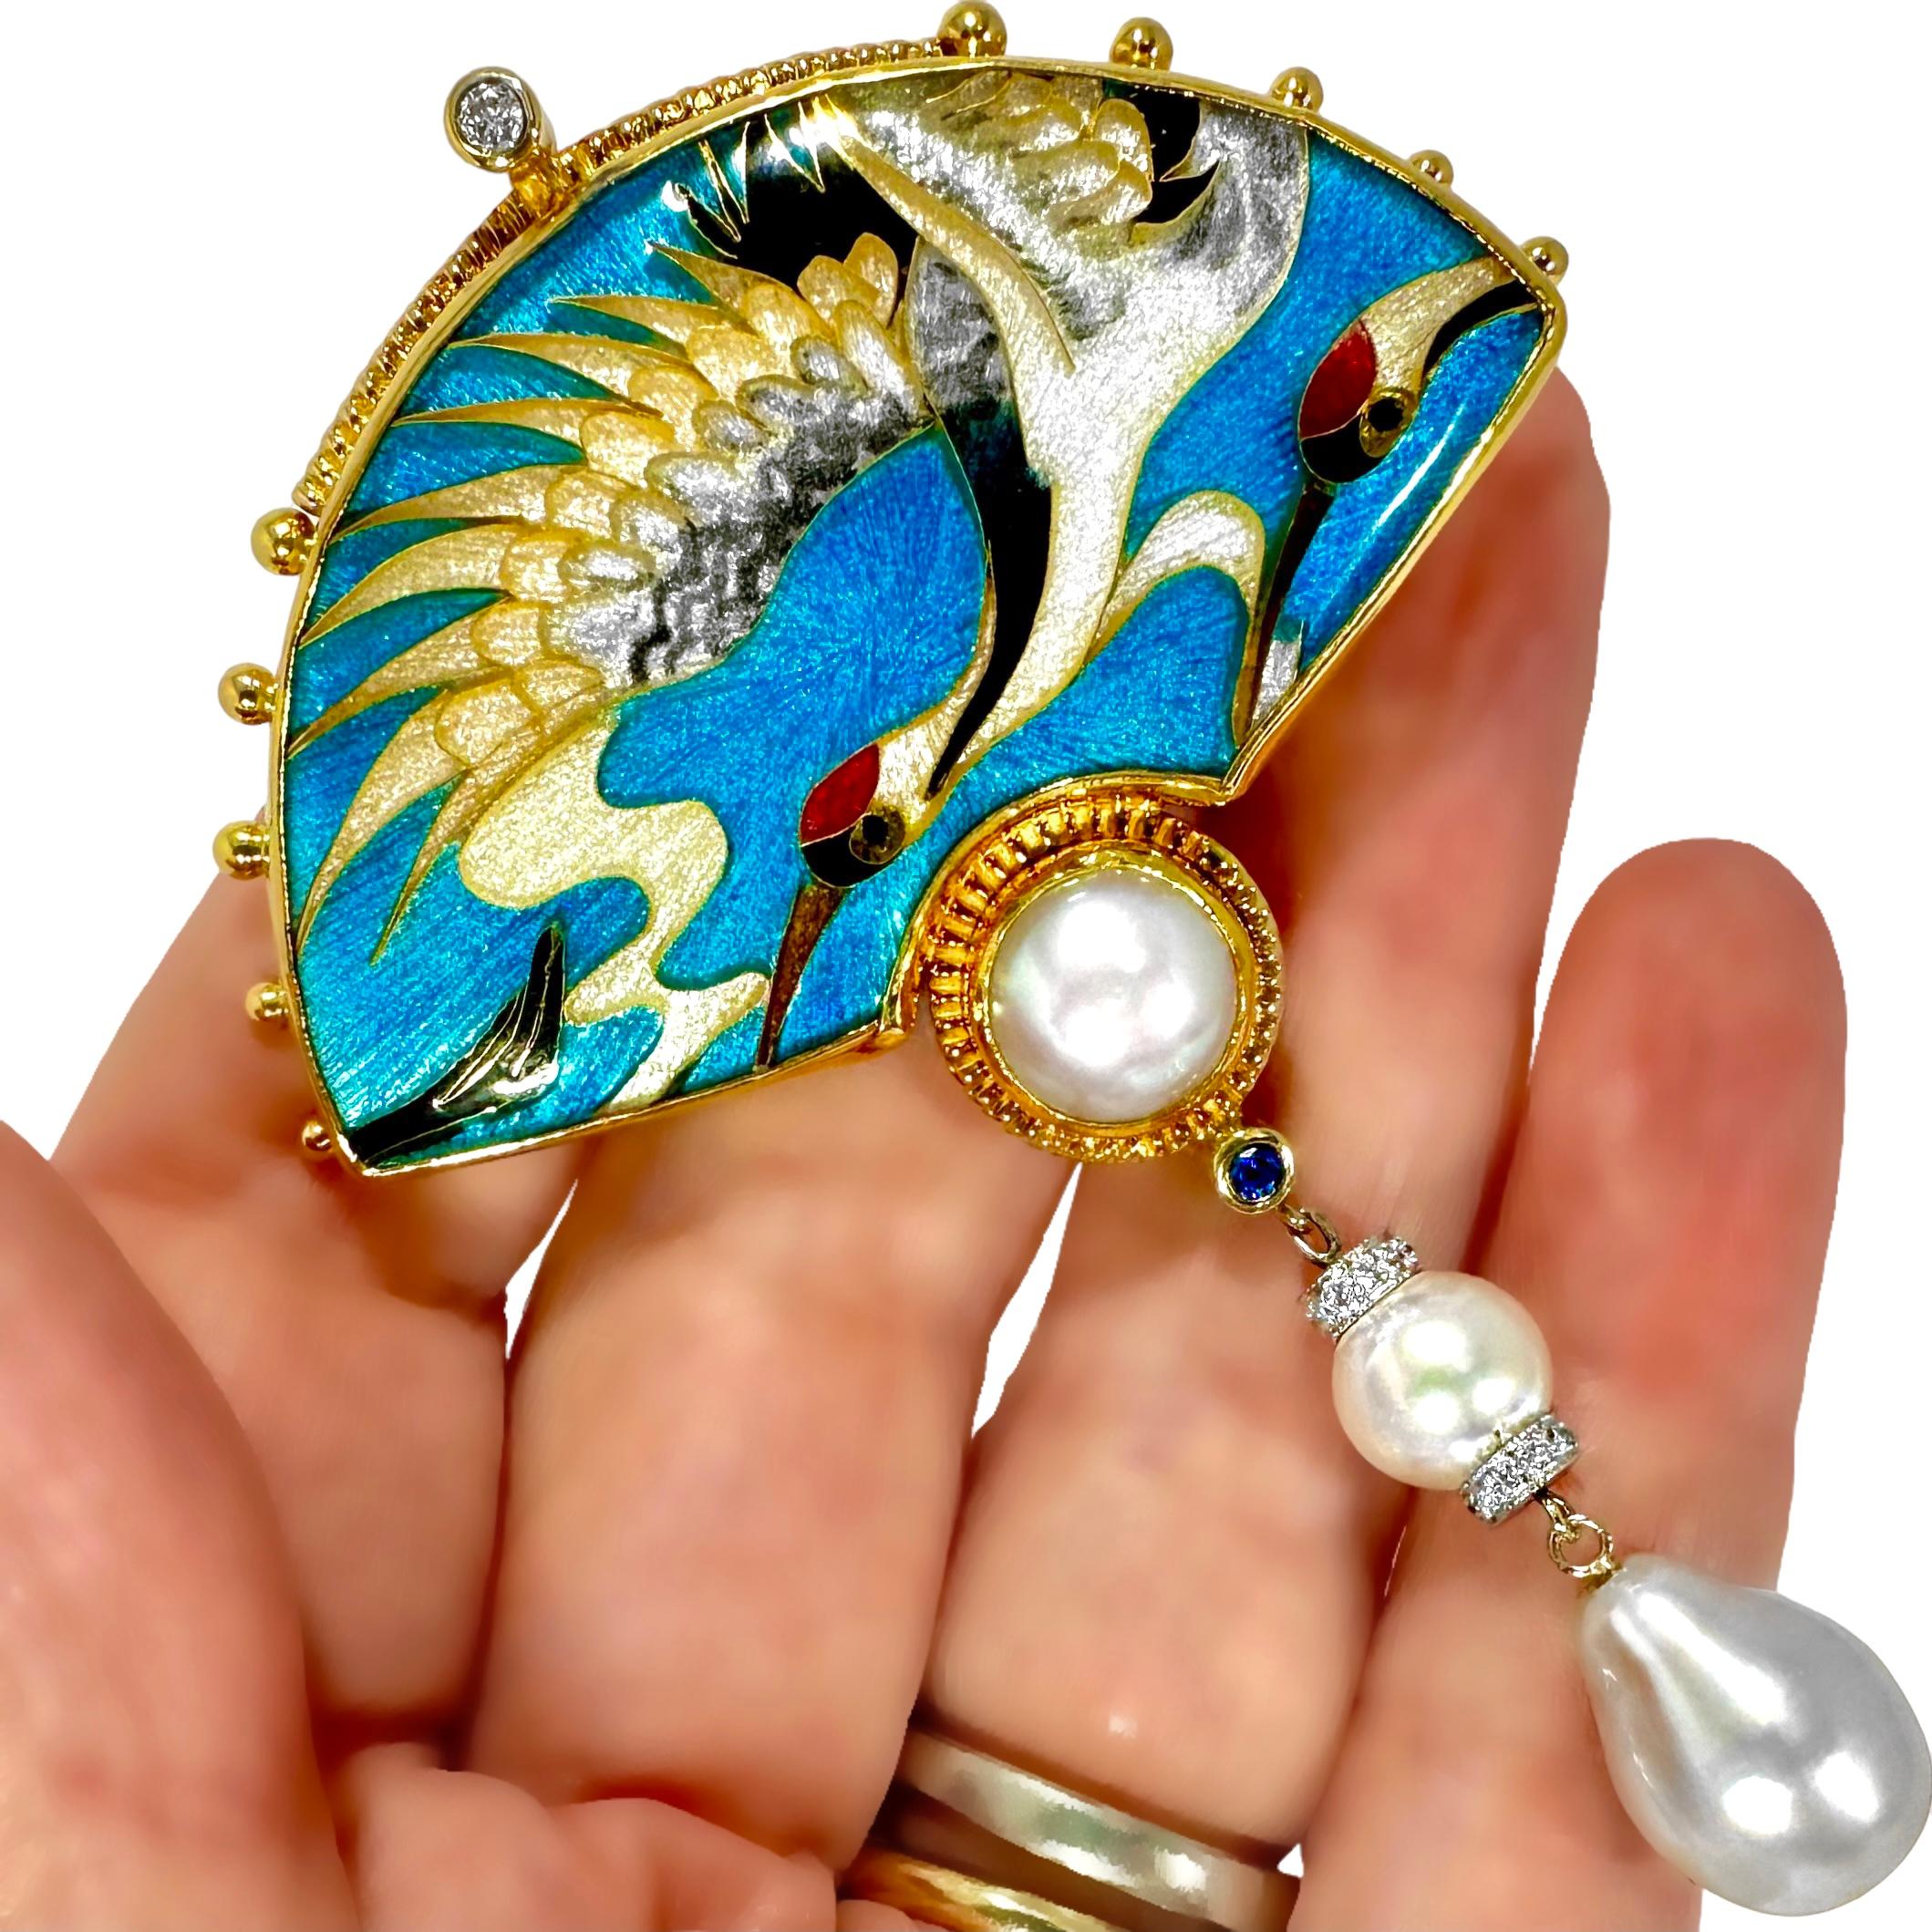 Avian Fantasy Theme, Gold, Enamel, Pearl and Sapphire Pendant by Tricia Young In Good Condition For Sale In Palm Beach, FL